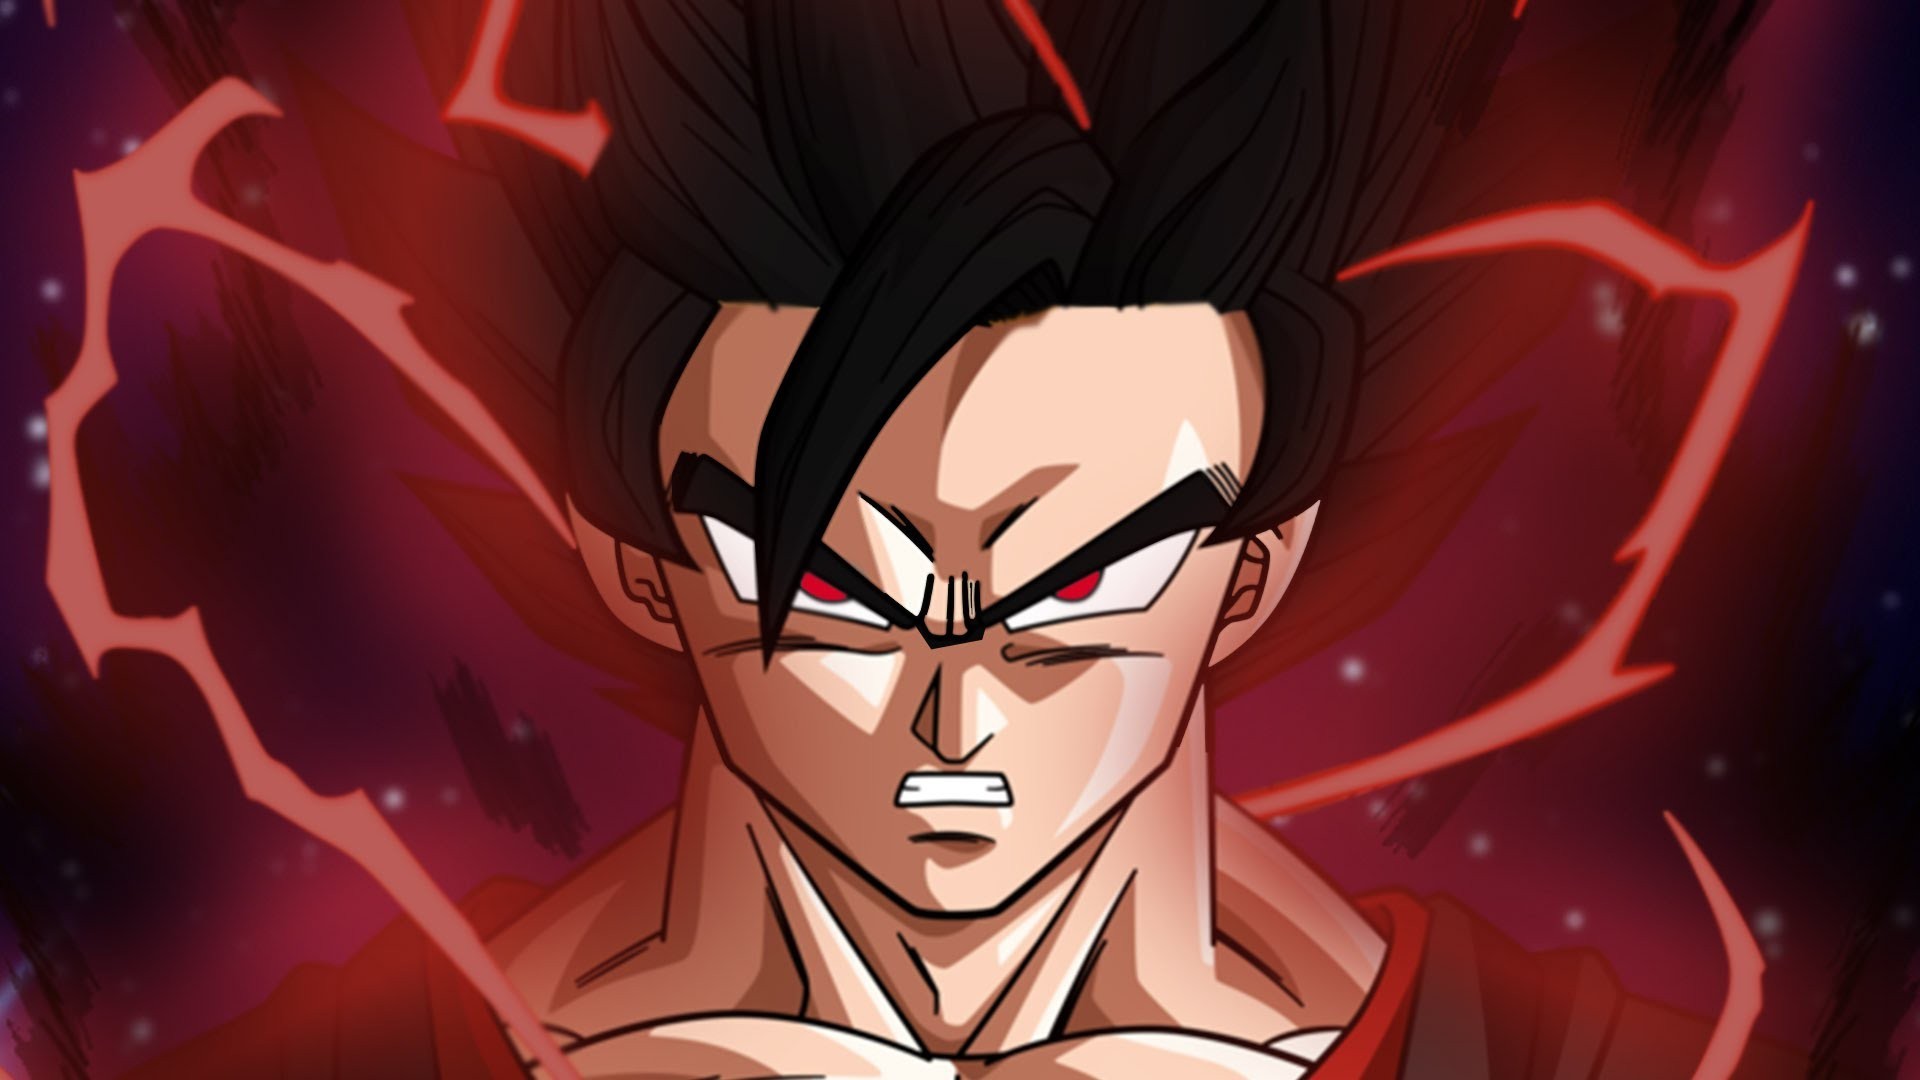 Black Goku HD Wallpaper With Resolution 1920X1080 pixel. You can make this wallpaper for your Desktop Computer Backgrounds, Mac Wallpapers, Android Lock screen or iPhone Screensavers